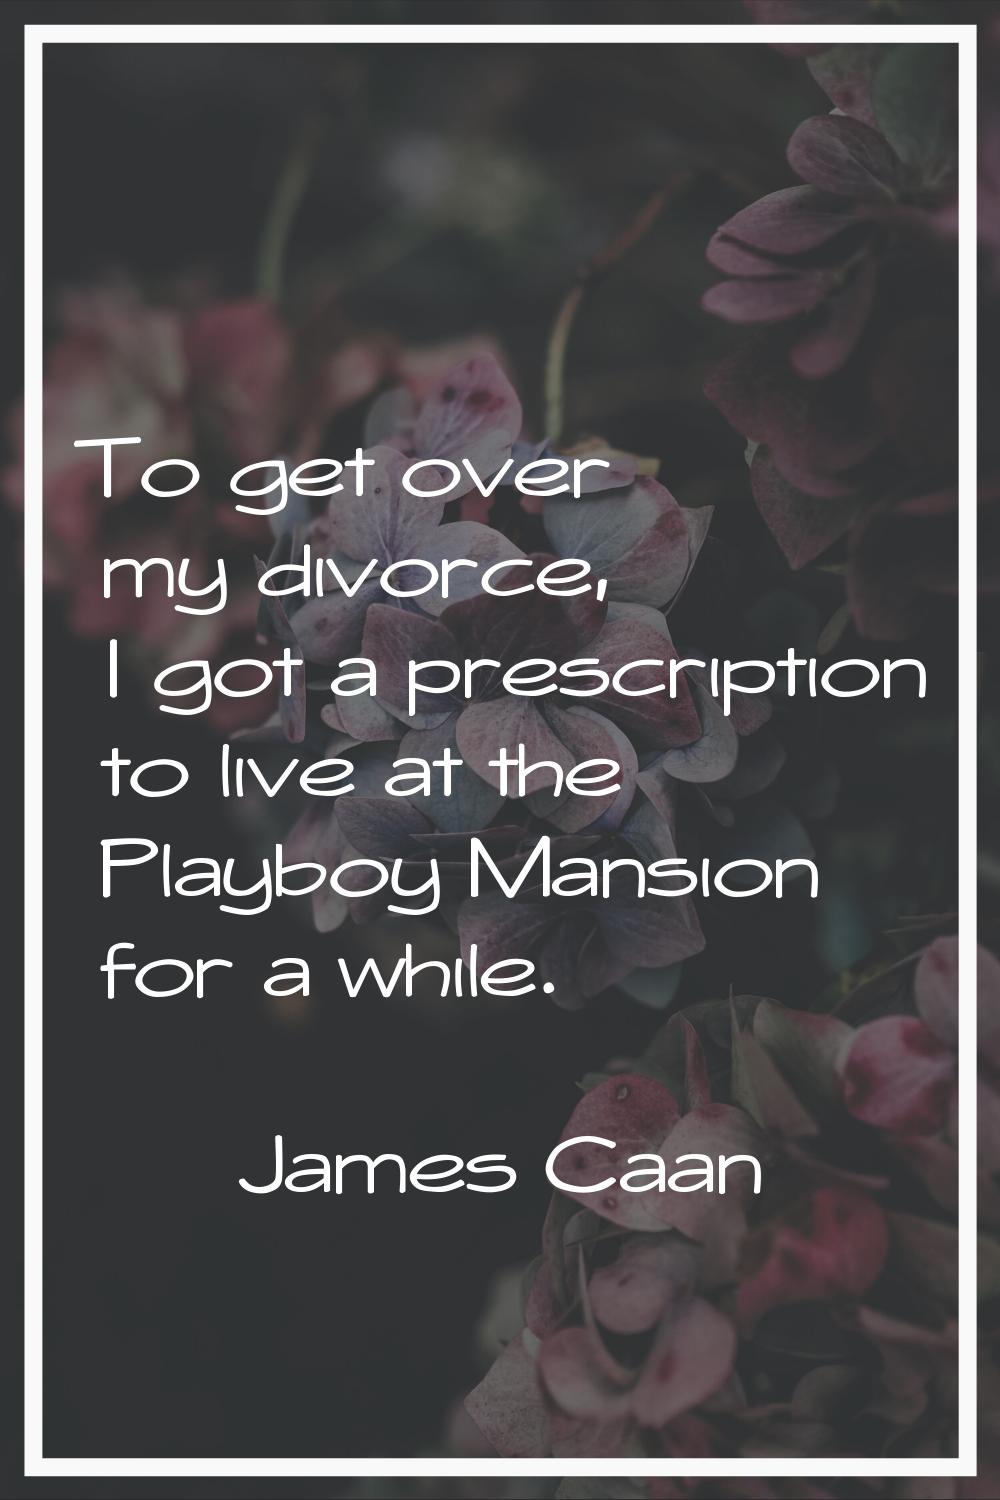 To get over my divorce, I got a prescription to live at the Playboy Mansion for a while.